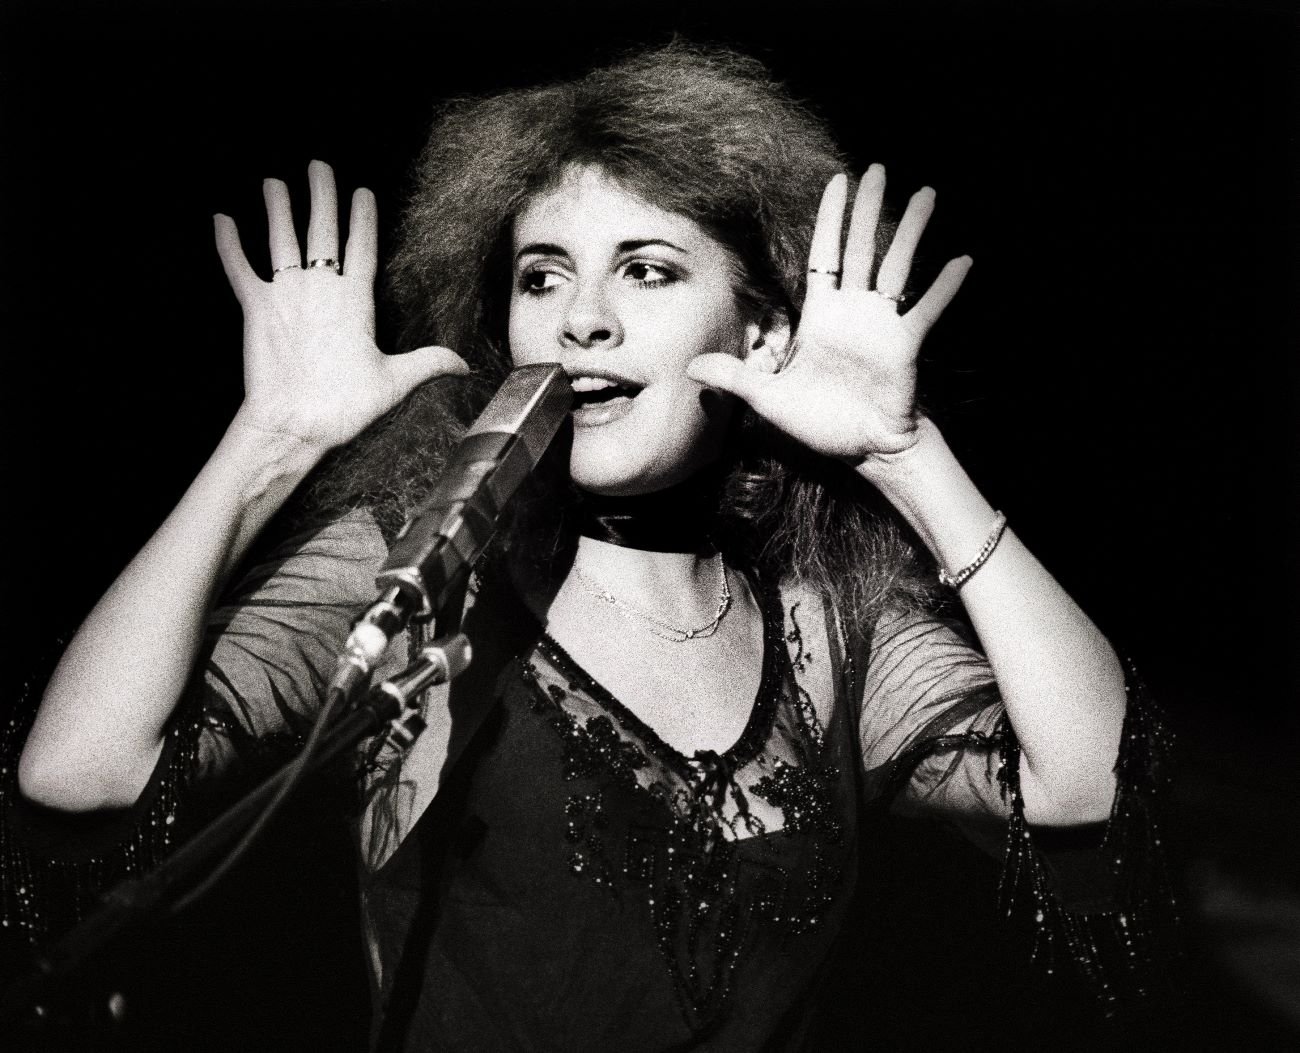 Stevie Nicks in a black lace top. She holds her hands up by her face.